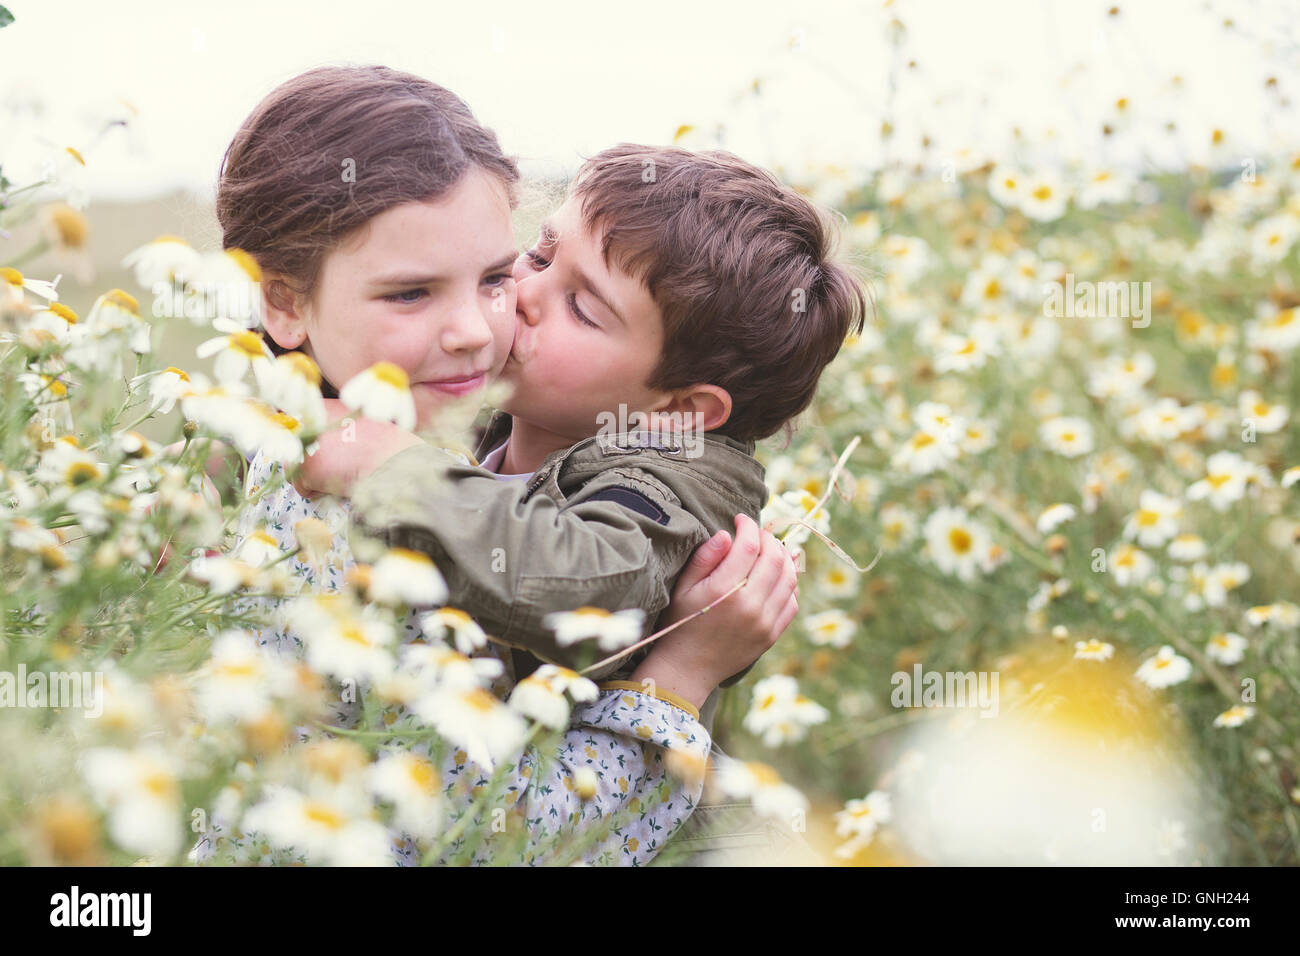 Boy kissing a girl's cheek in field of daisies, Andalucia, Spain Stock Photo